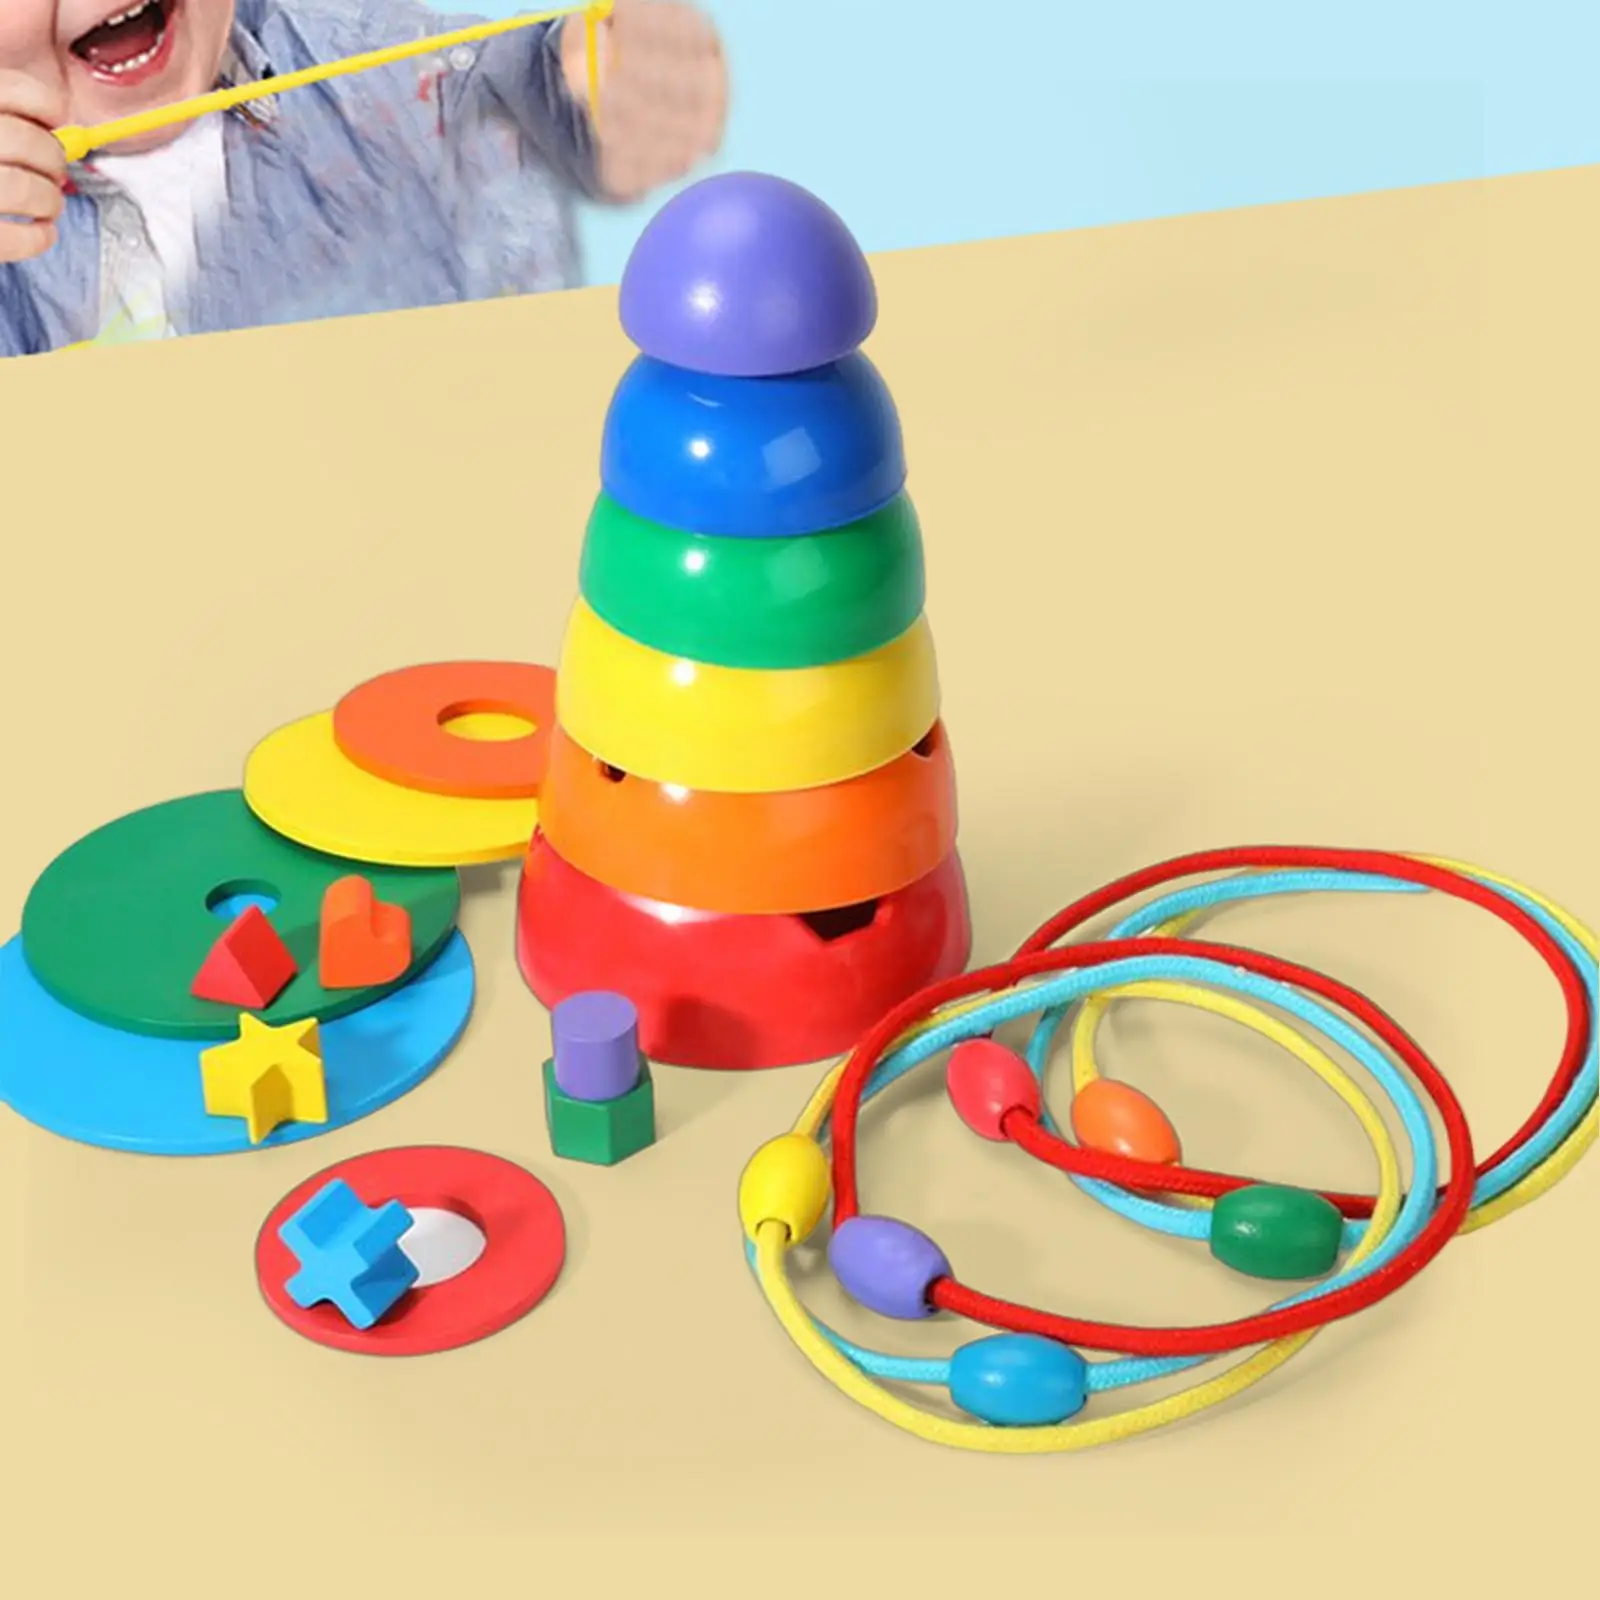 Colorful Nesting Building Stacking Blocks Toy Educational for Babies Gifts